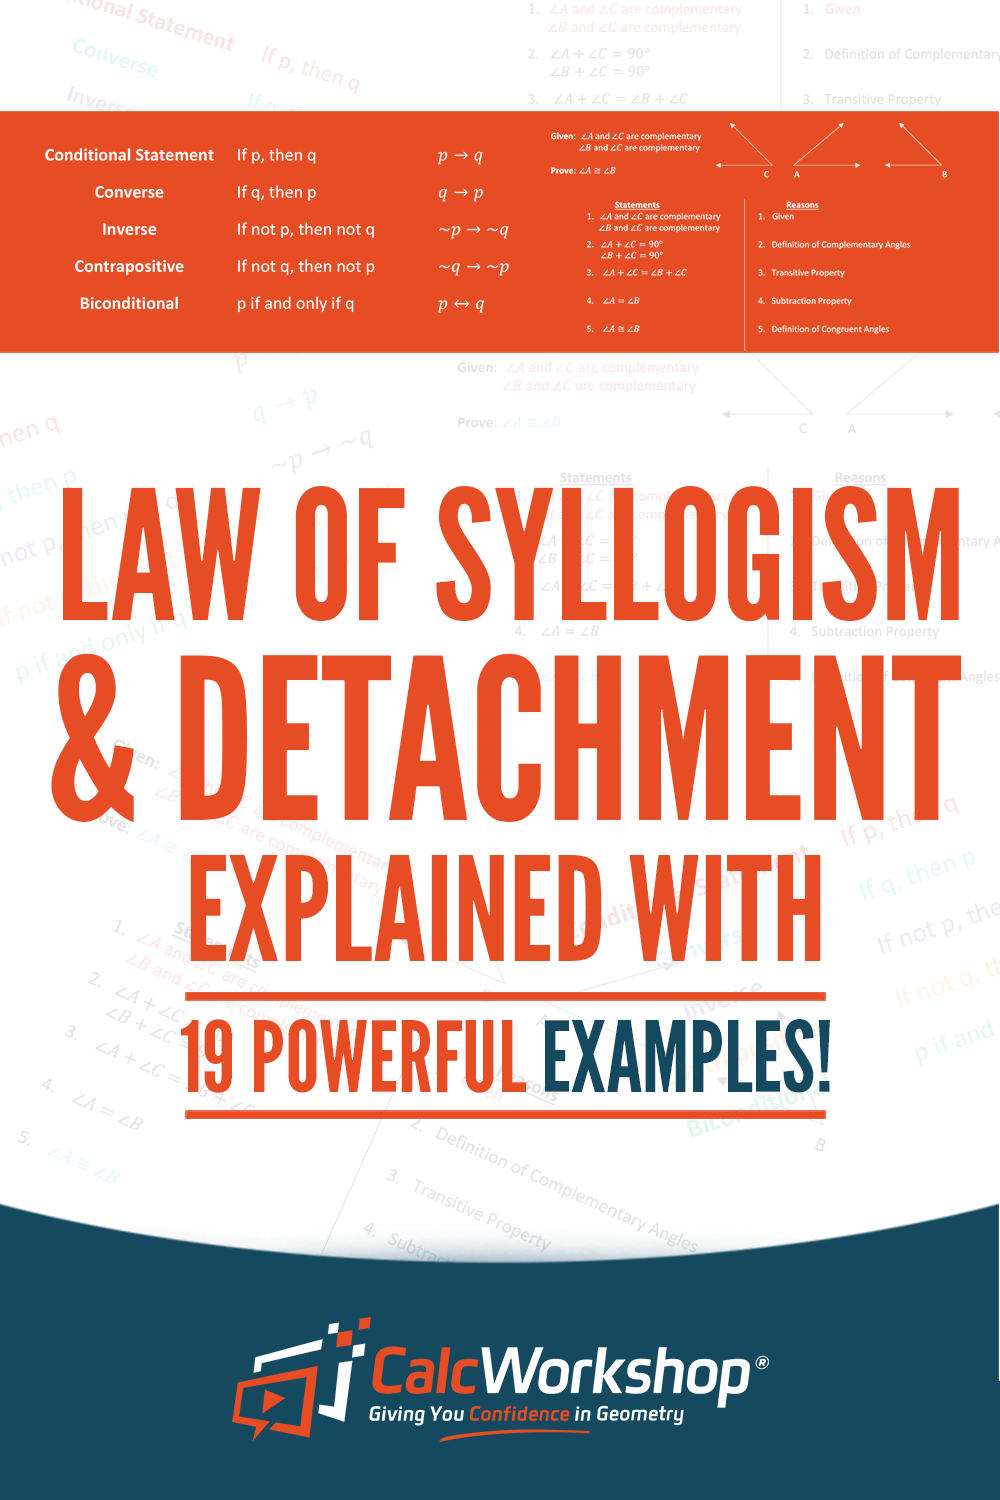 Law of Syllogism Detachment (Explained w/ 19 Examples )